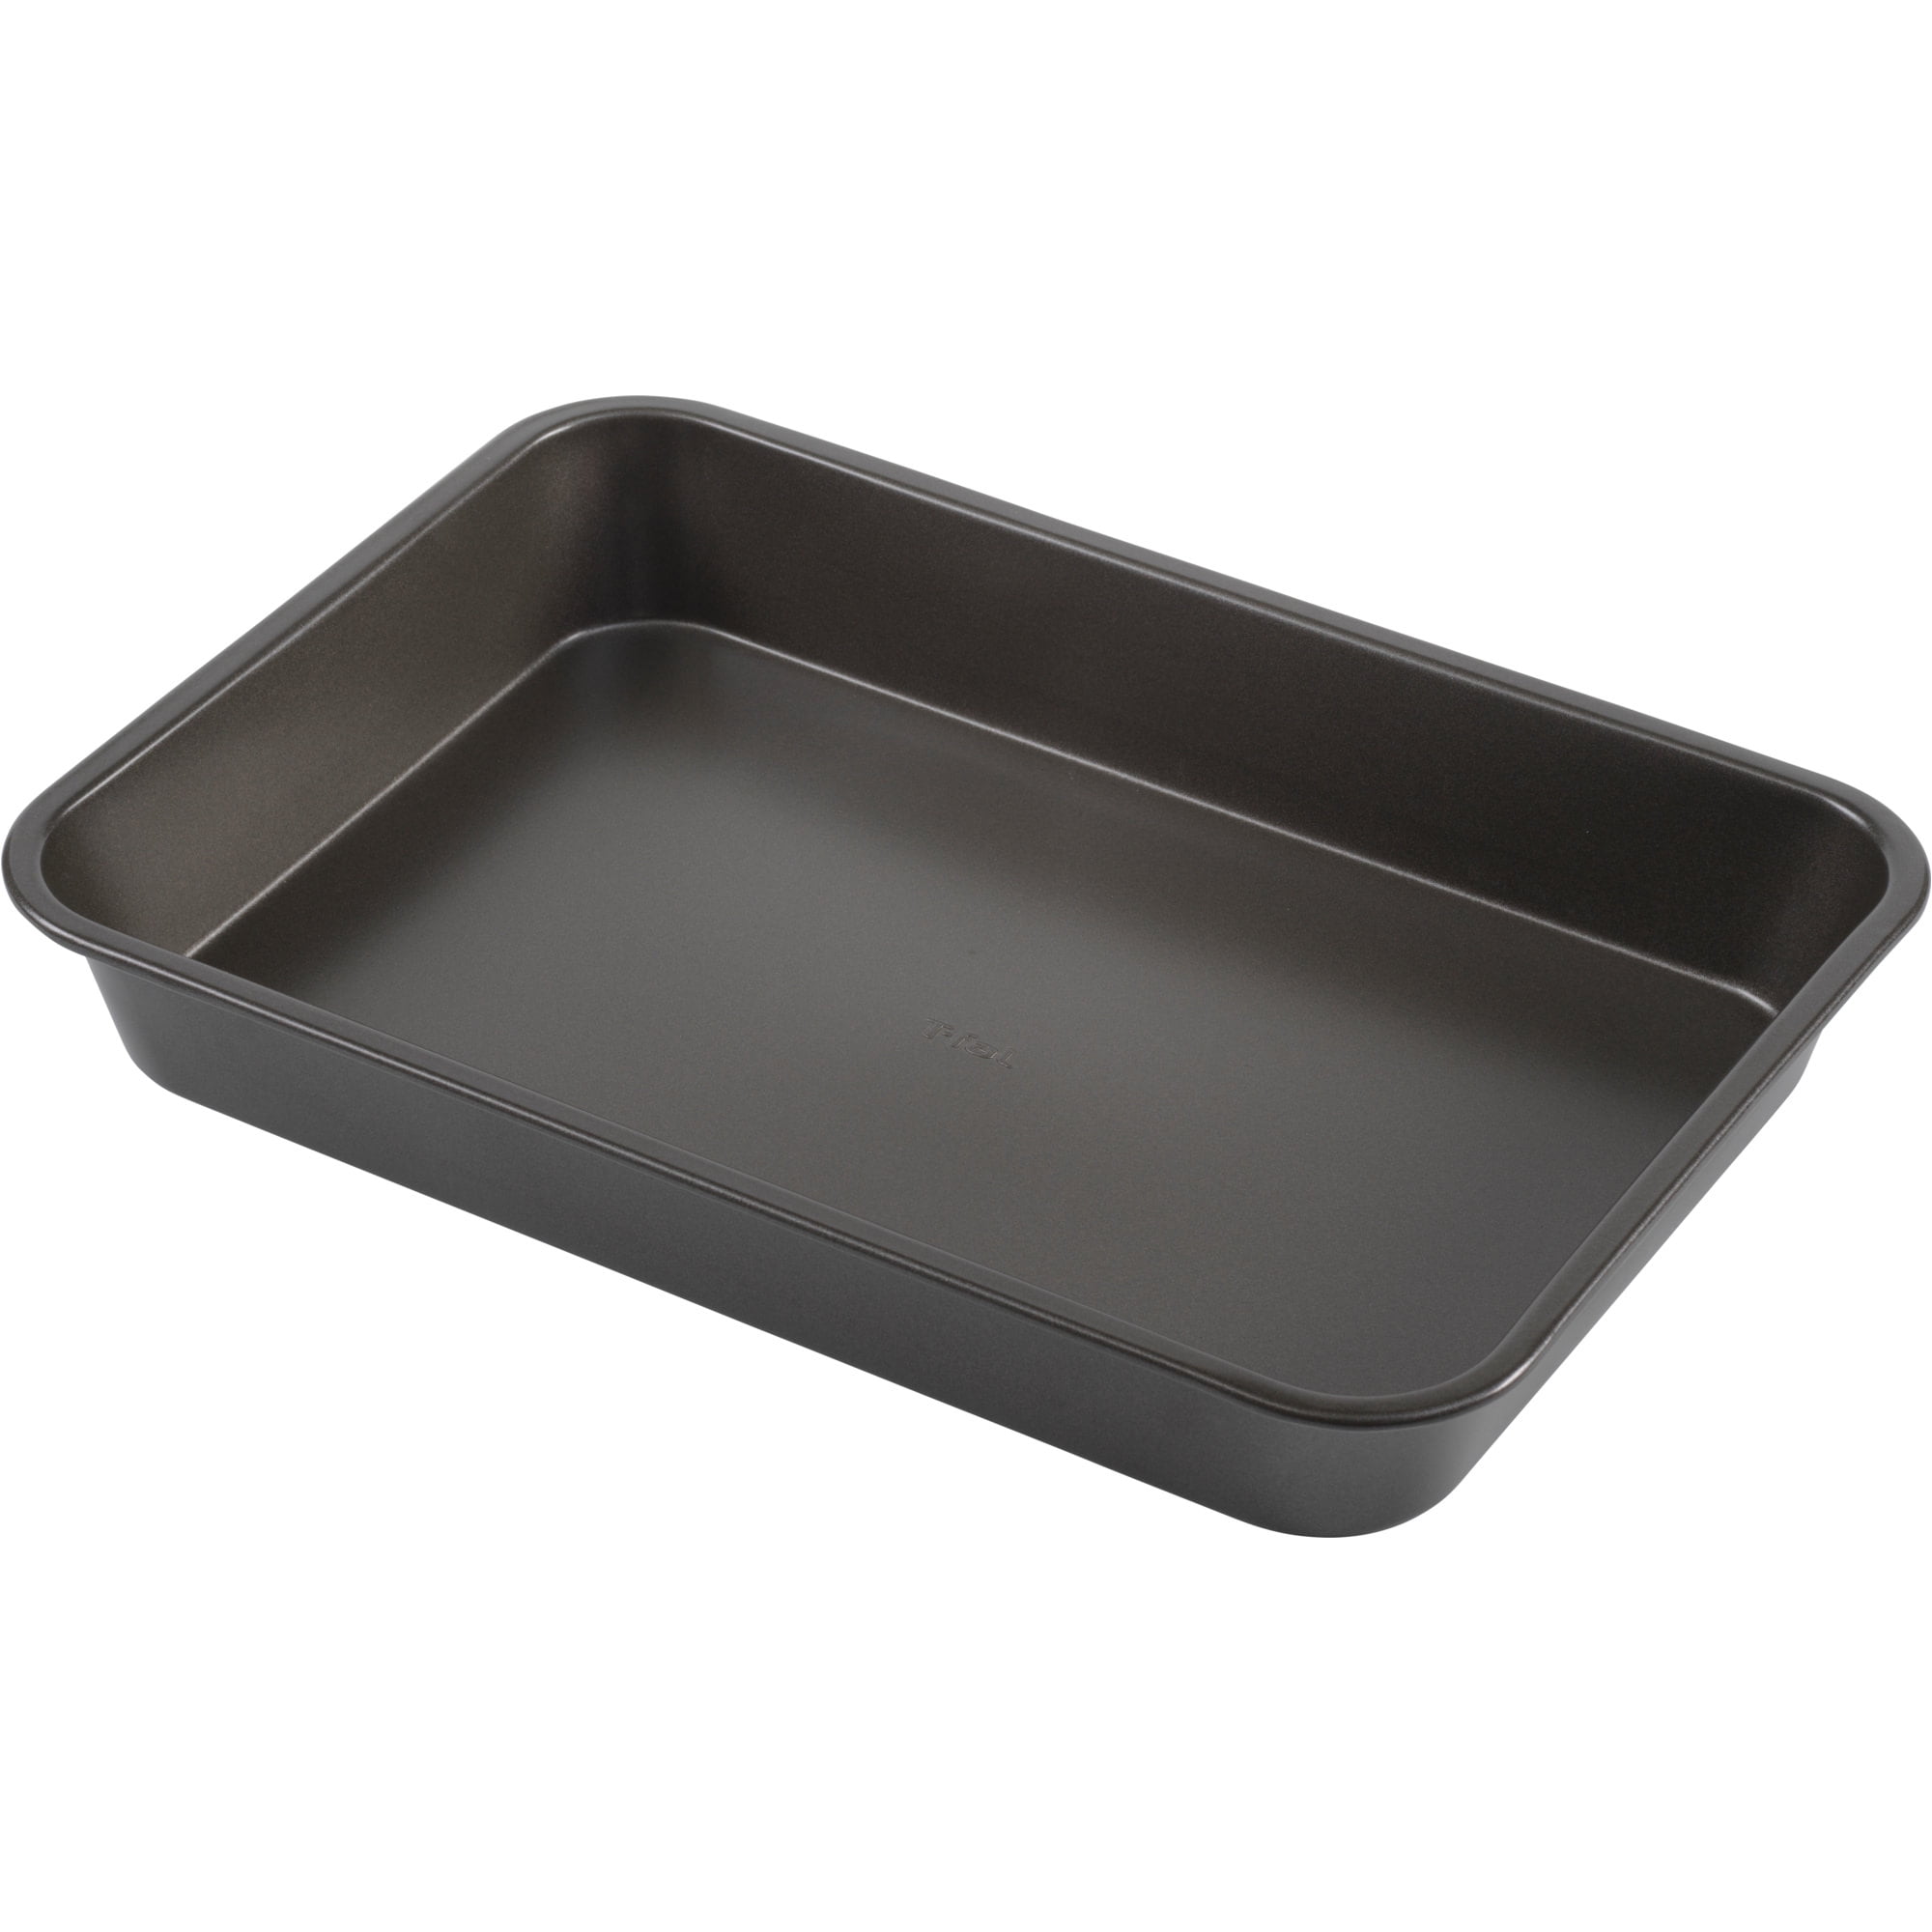 T-fal Professional Bakeware Nonstick Oblong Cake Pan, 14 x 9-Inch